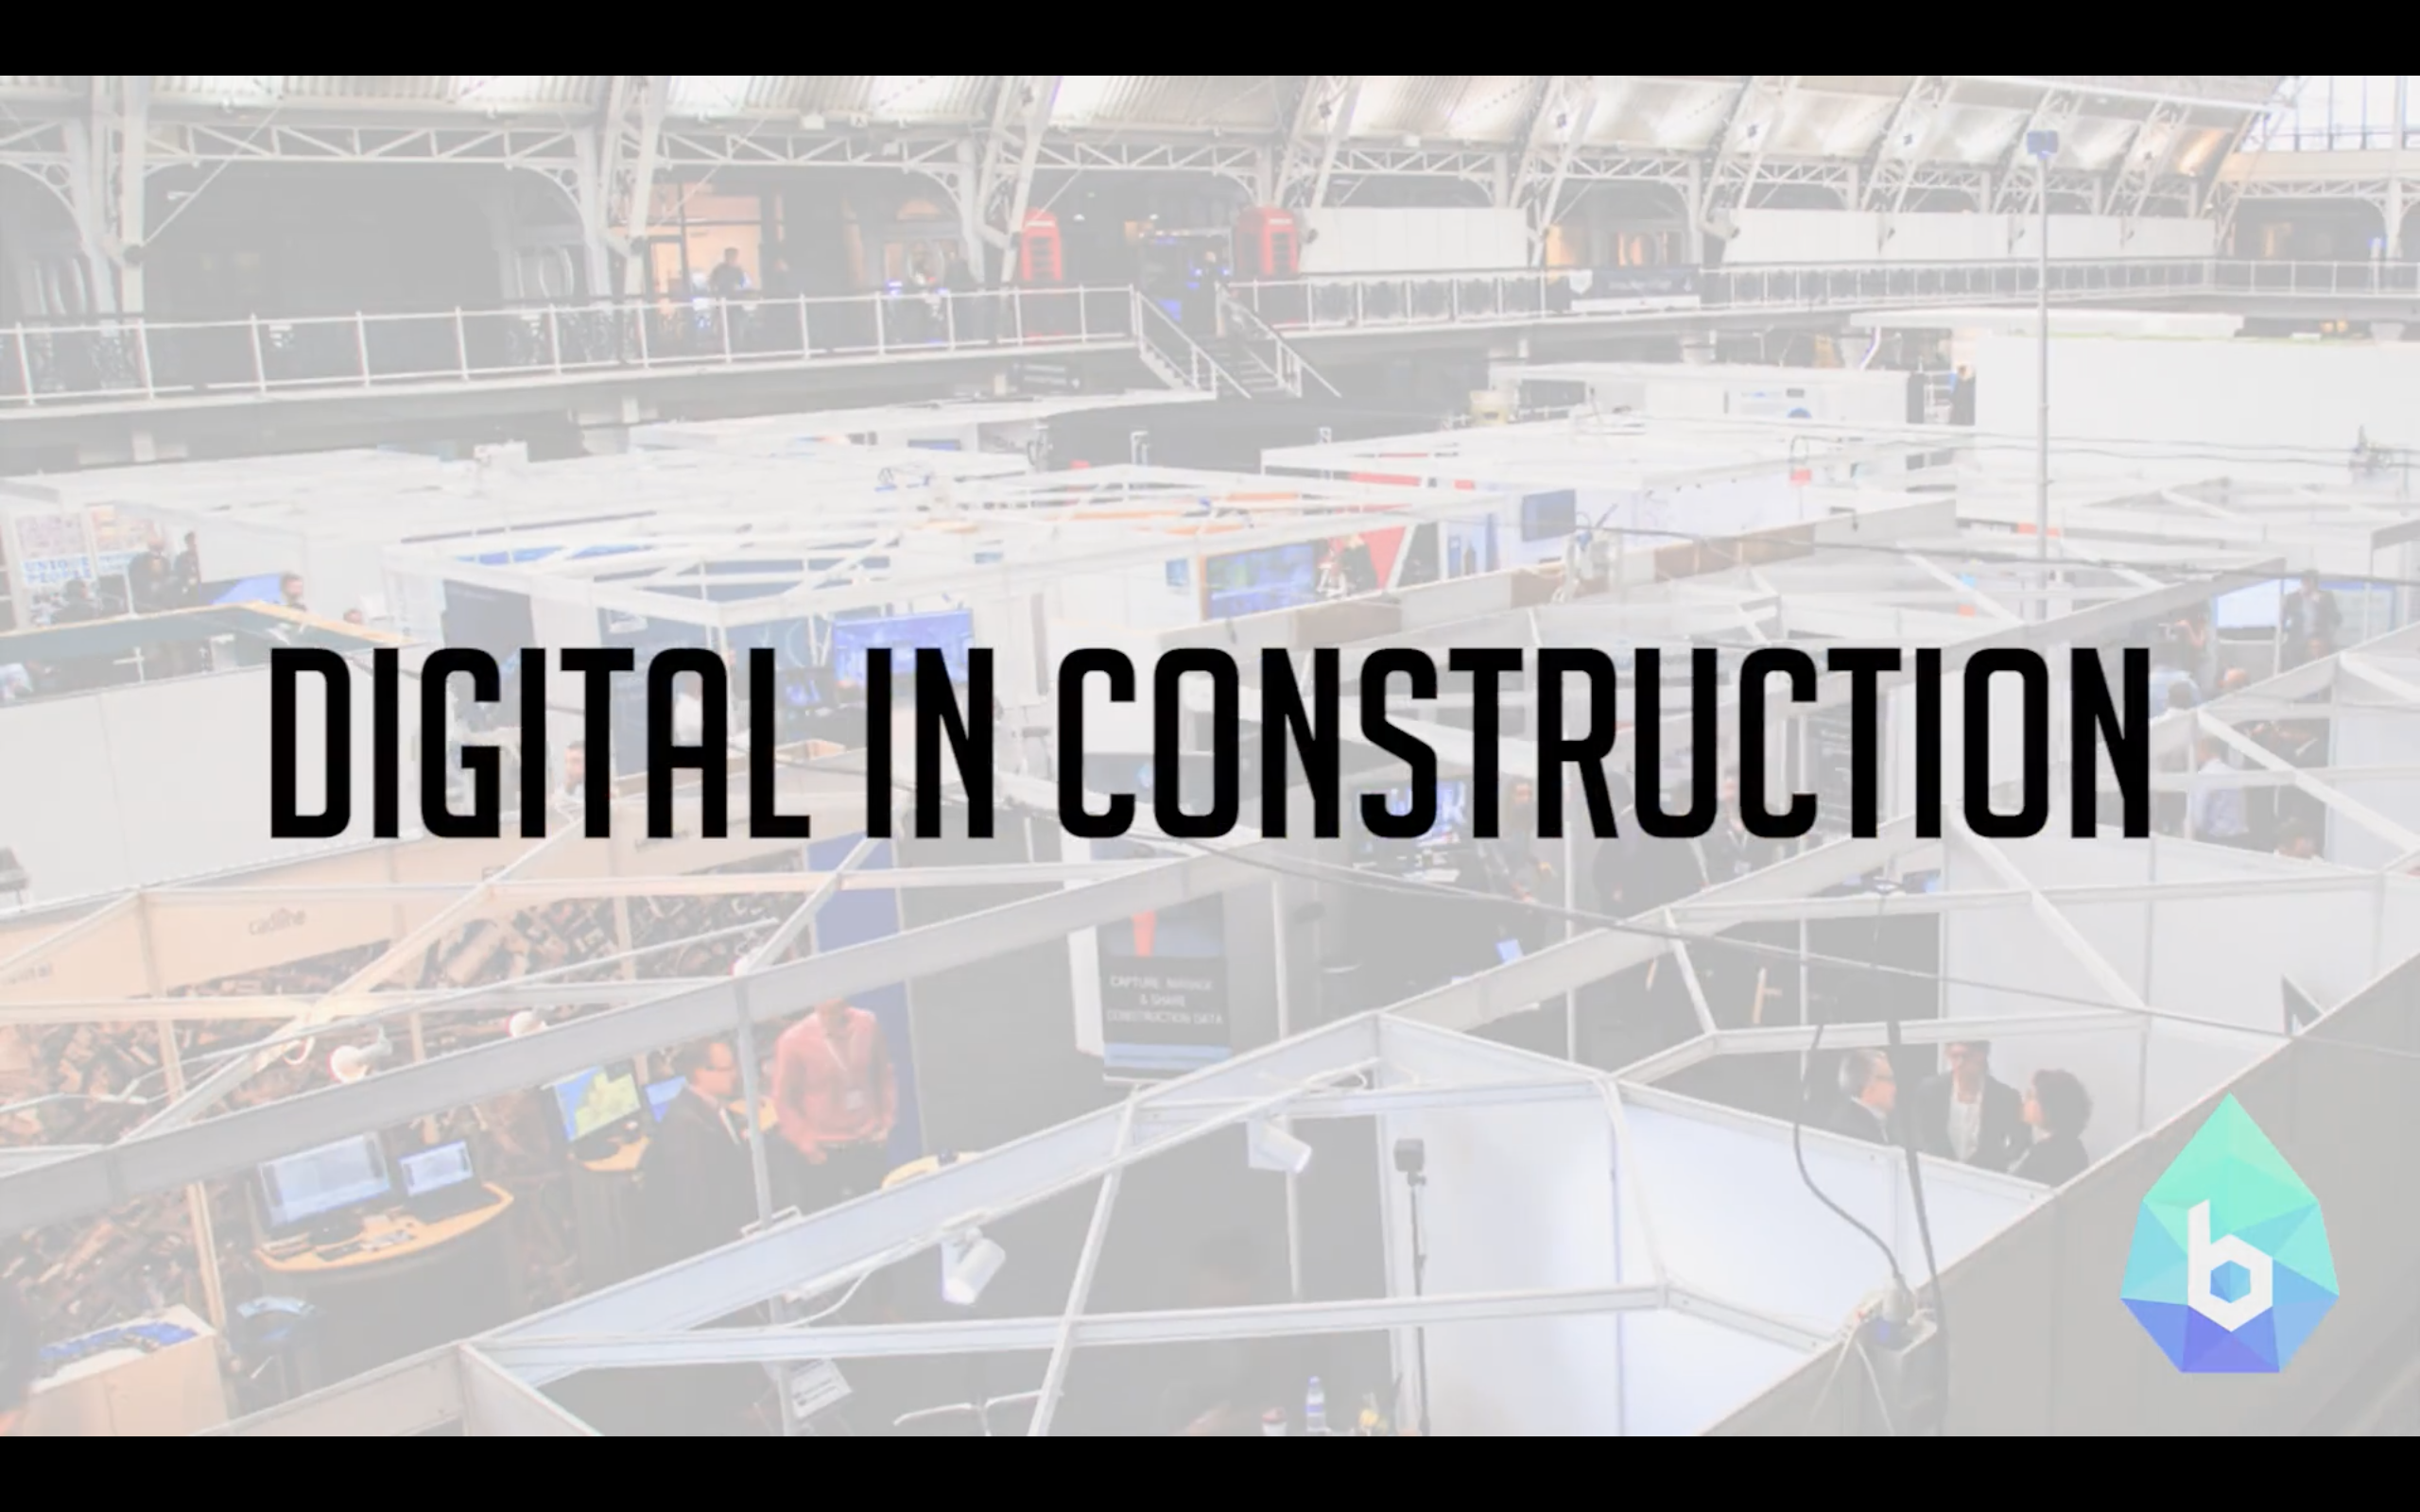 Why is digital important in construction?